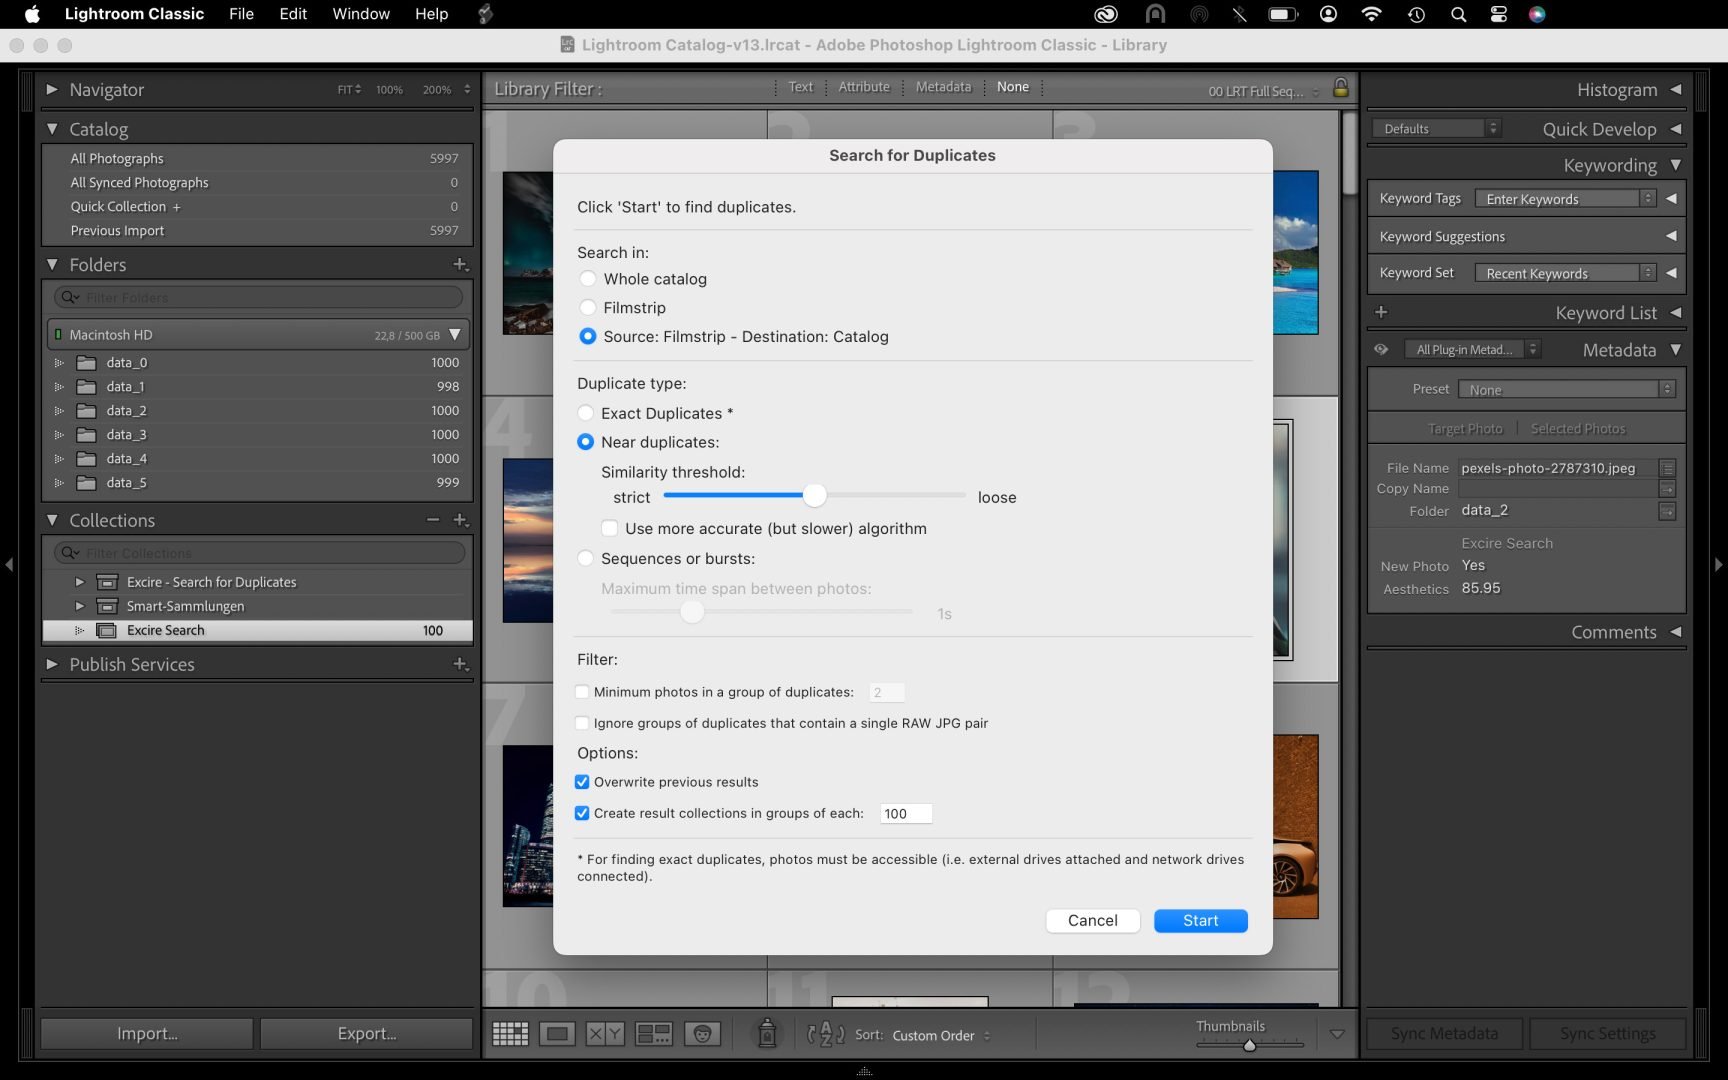 Excire plugin brings AI text search to Lightroom